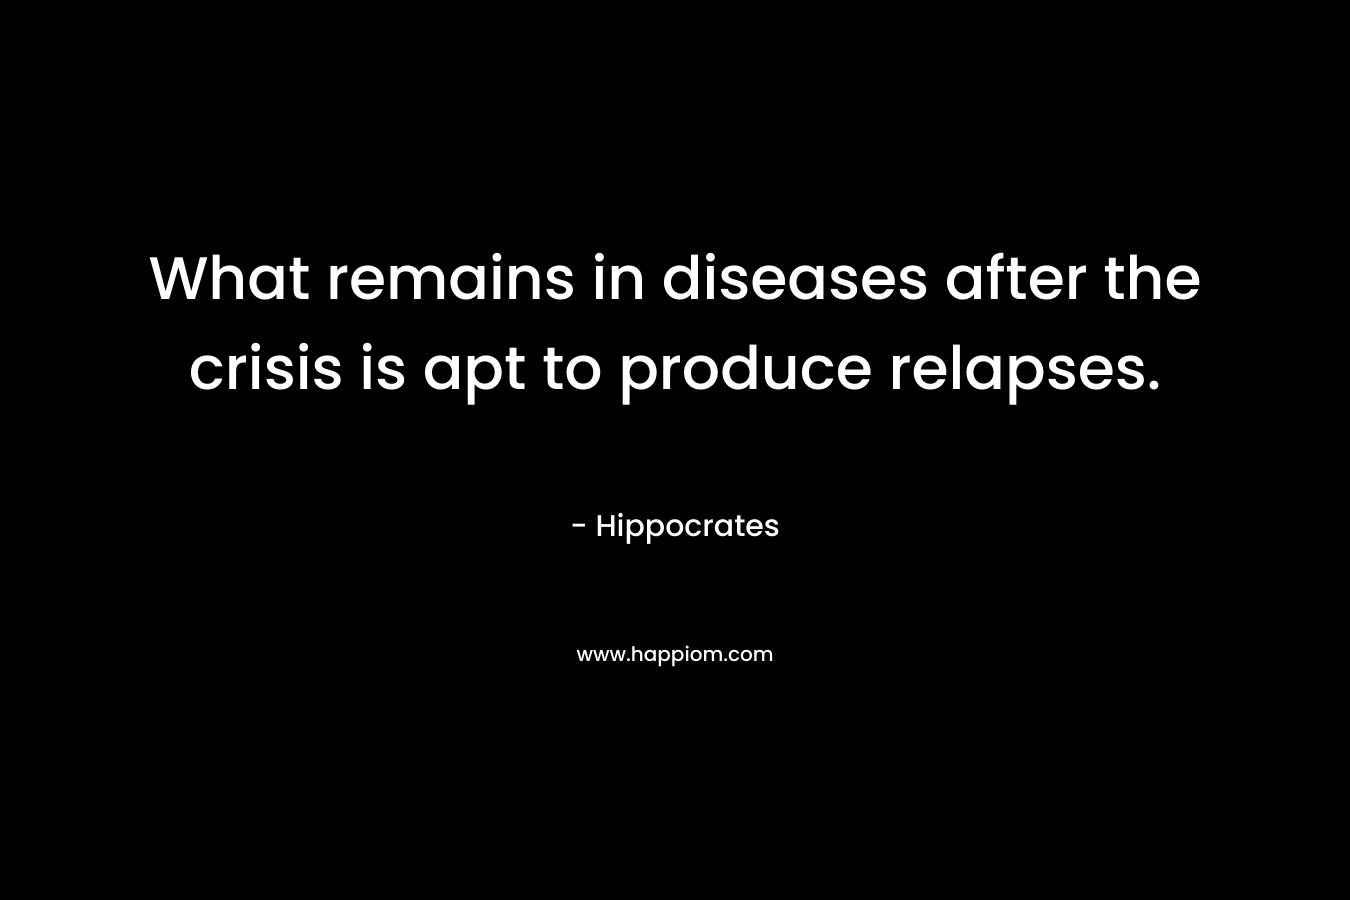 What remains in diseases after the crisis is apt to produce relapses. – Hippocrates